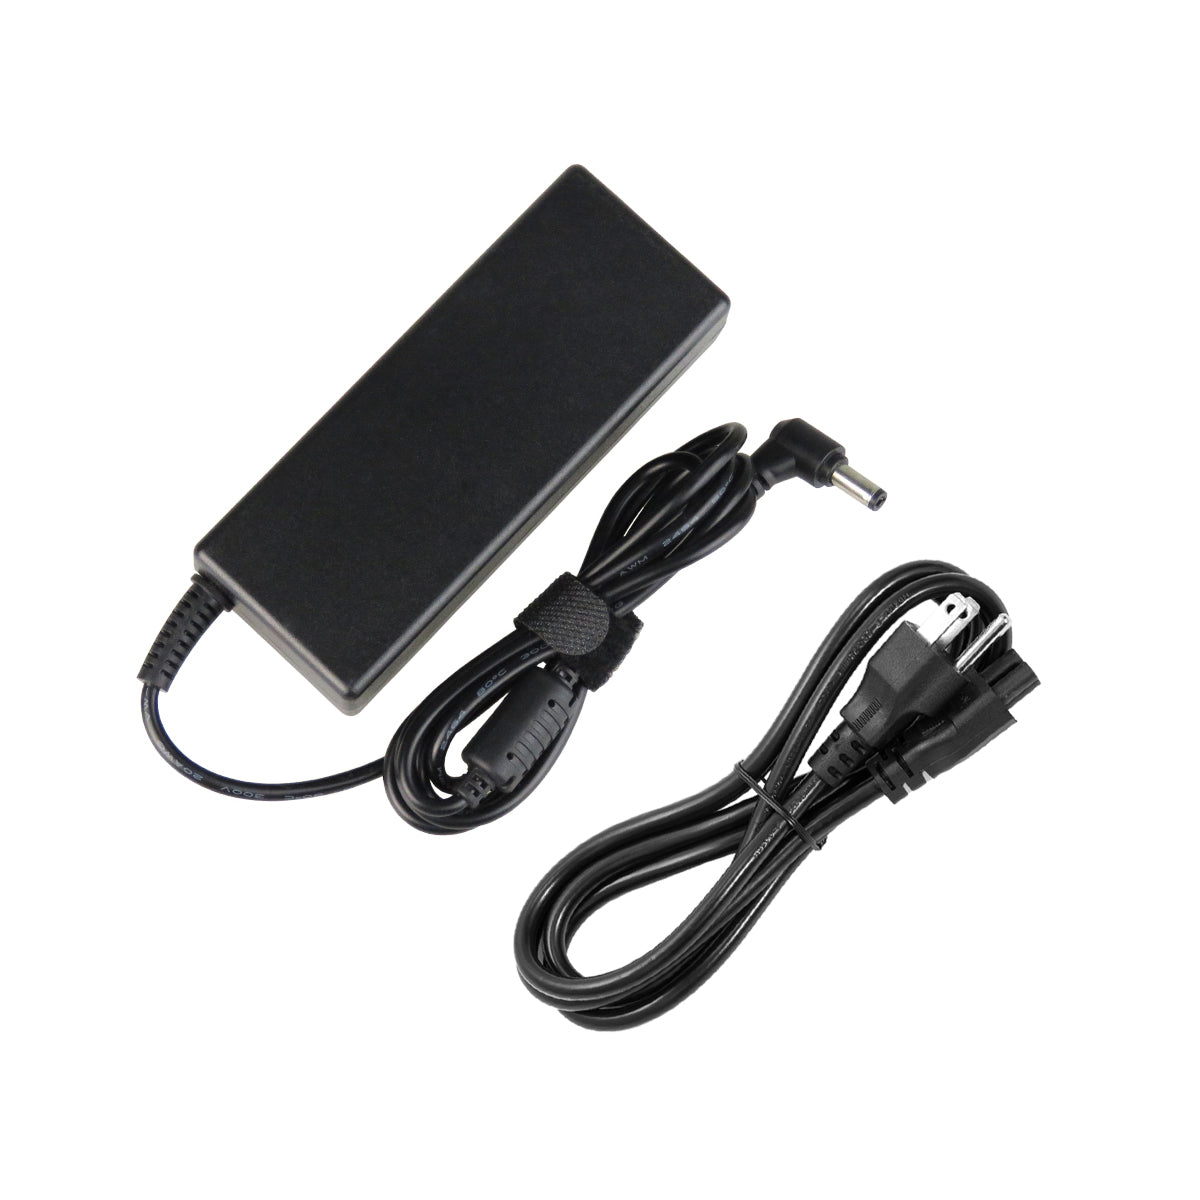 AC Adapter Charger for ASUS A44L Notebook.